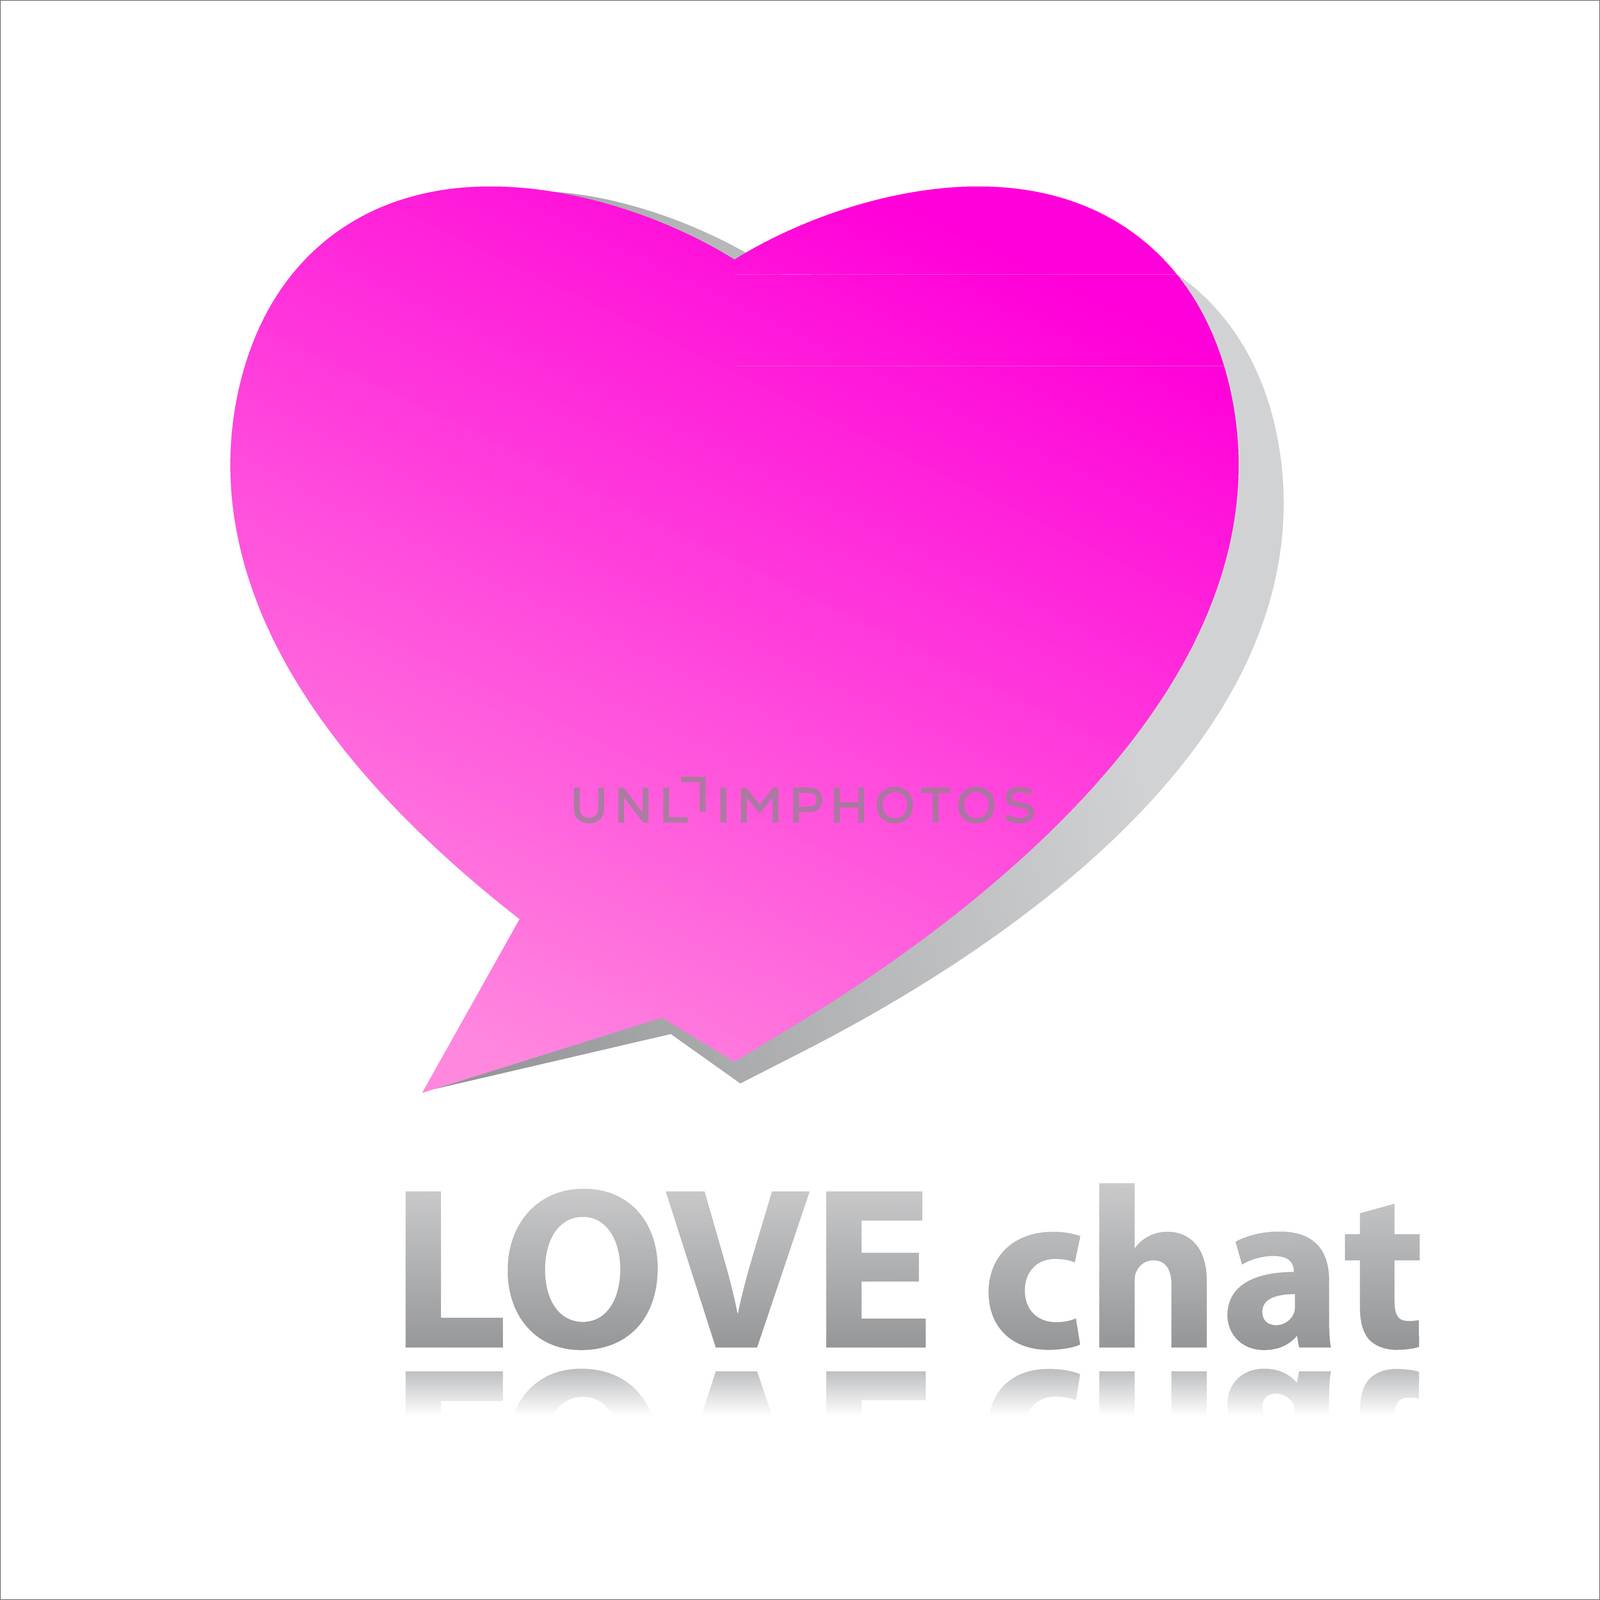 Sign of love-chat. Heart - speech-bubble.